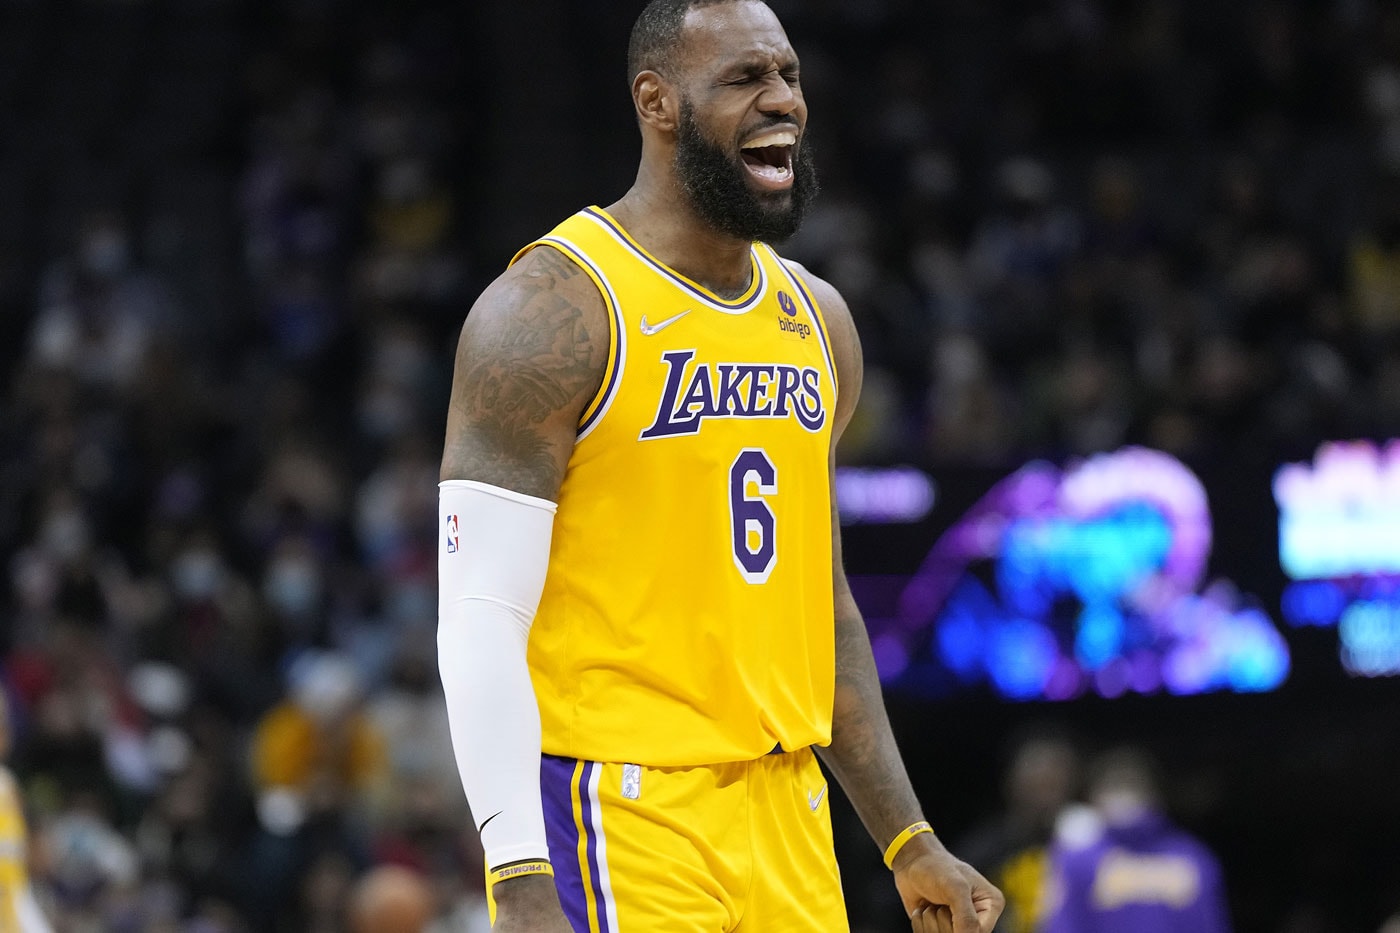 LeBron James Becomes Only Player in NBA History To Have 30K Points, 10K Rebounds and 10K Assists los angeles lakers nike king james the goat basketball phoenix suns 